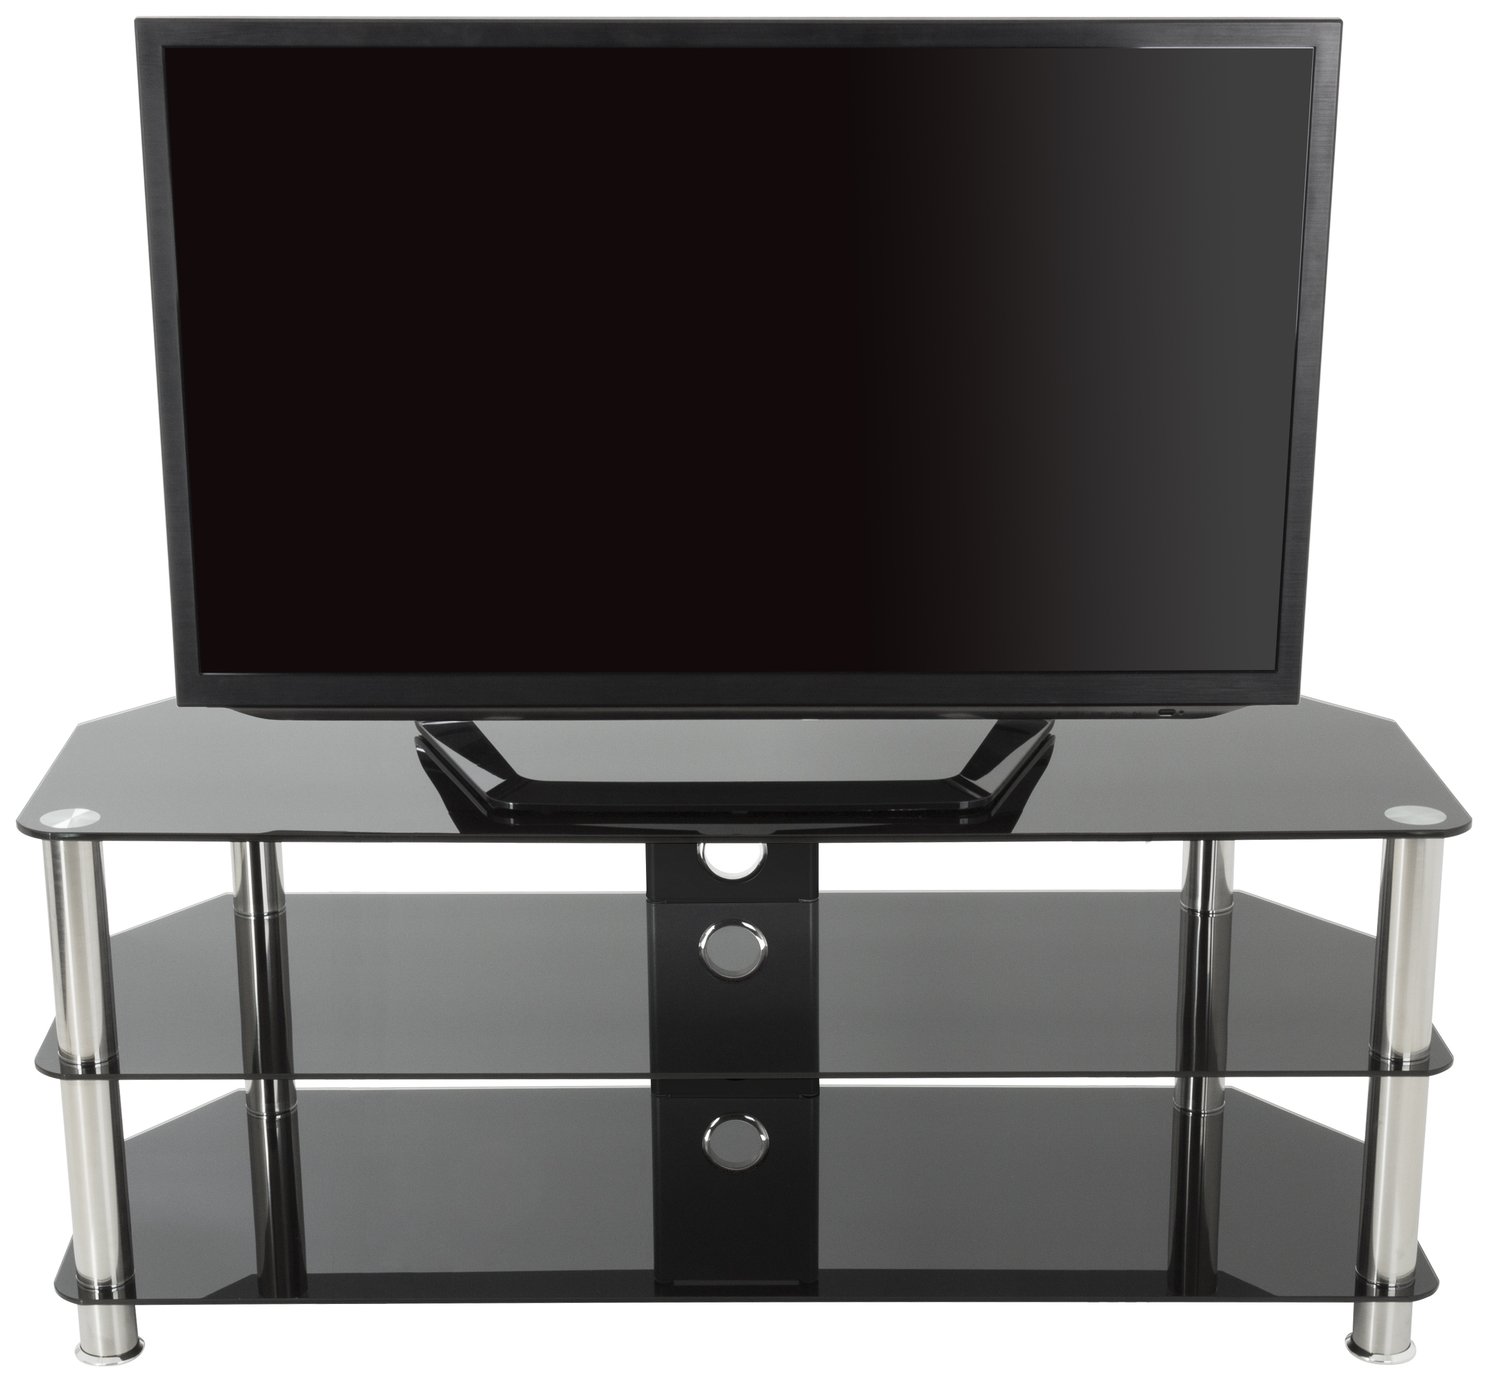 AVF Classic Up to 60 Inch TV Stand Review